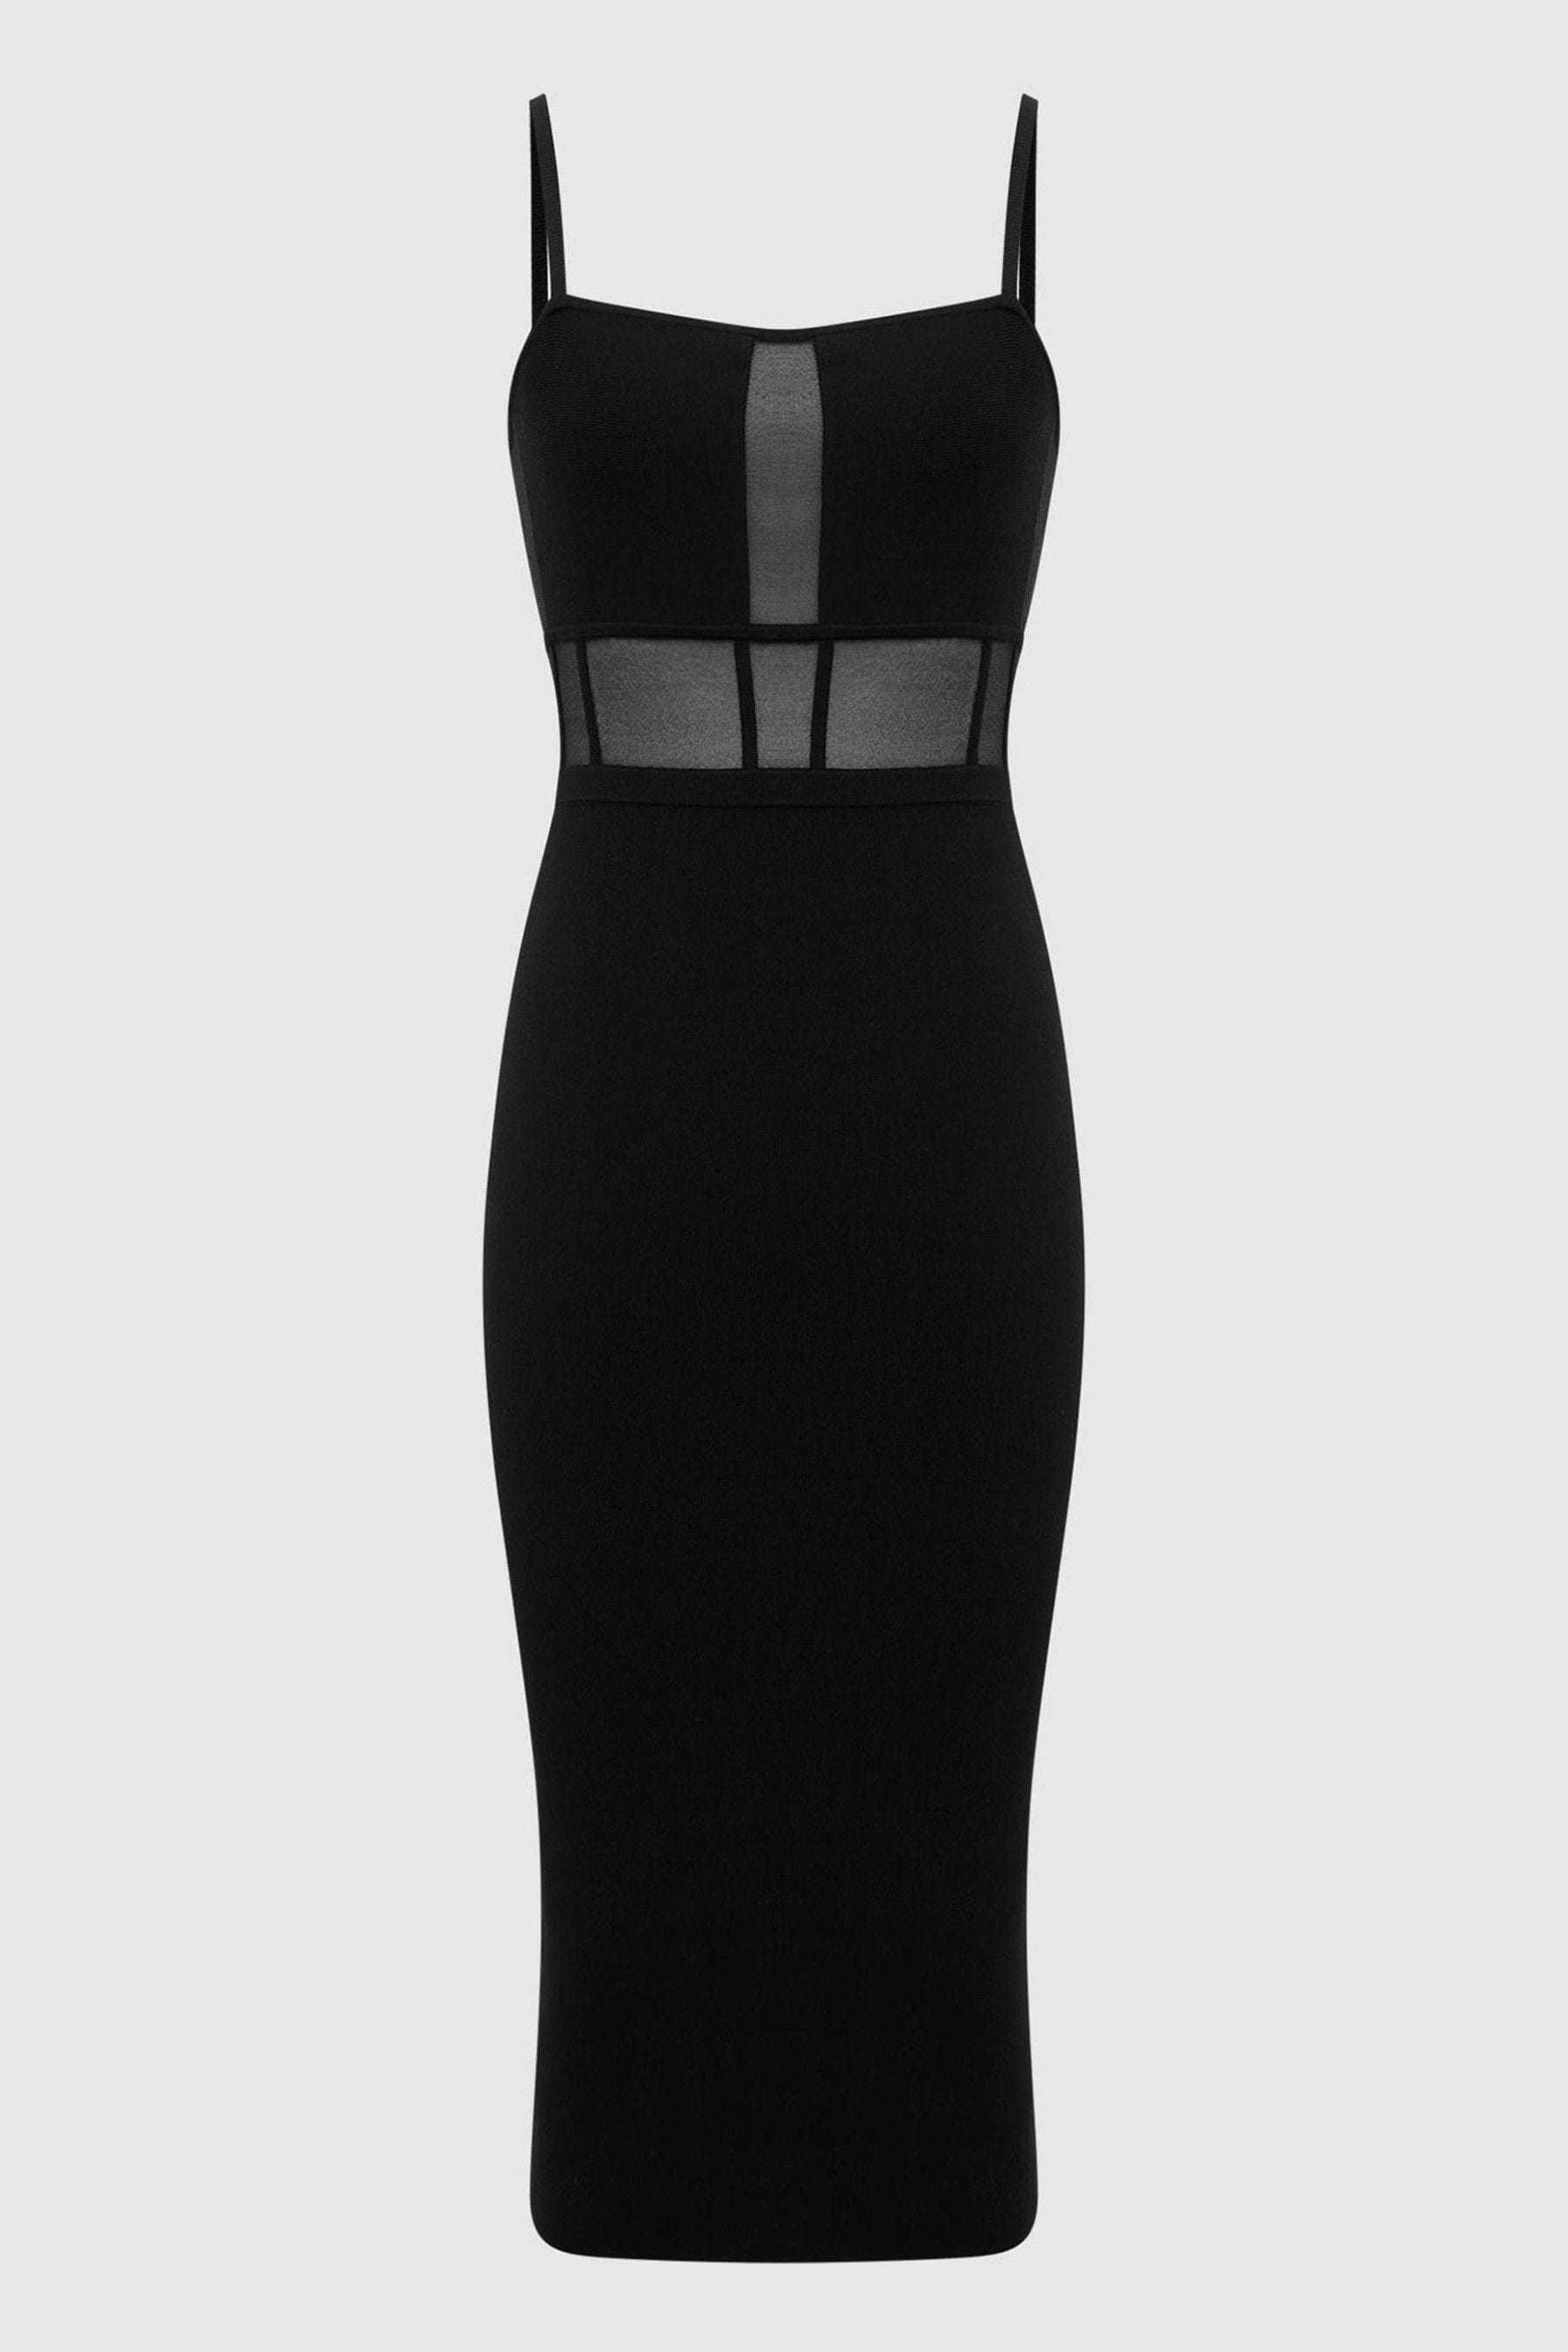 Buy Reiss Black Luisa Knitted Bodycon Dress from the Next UK online shop